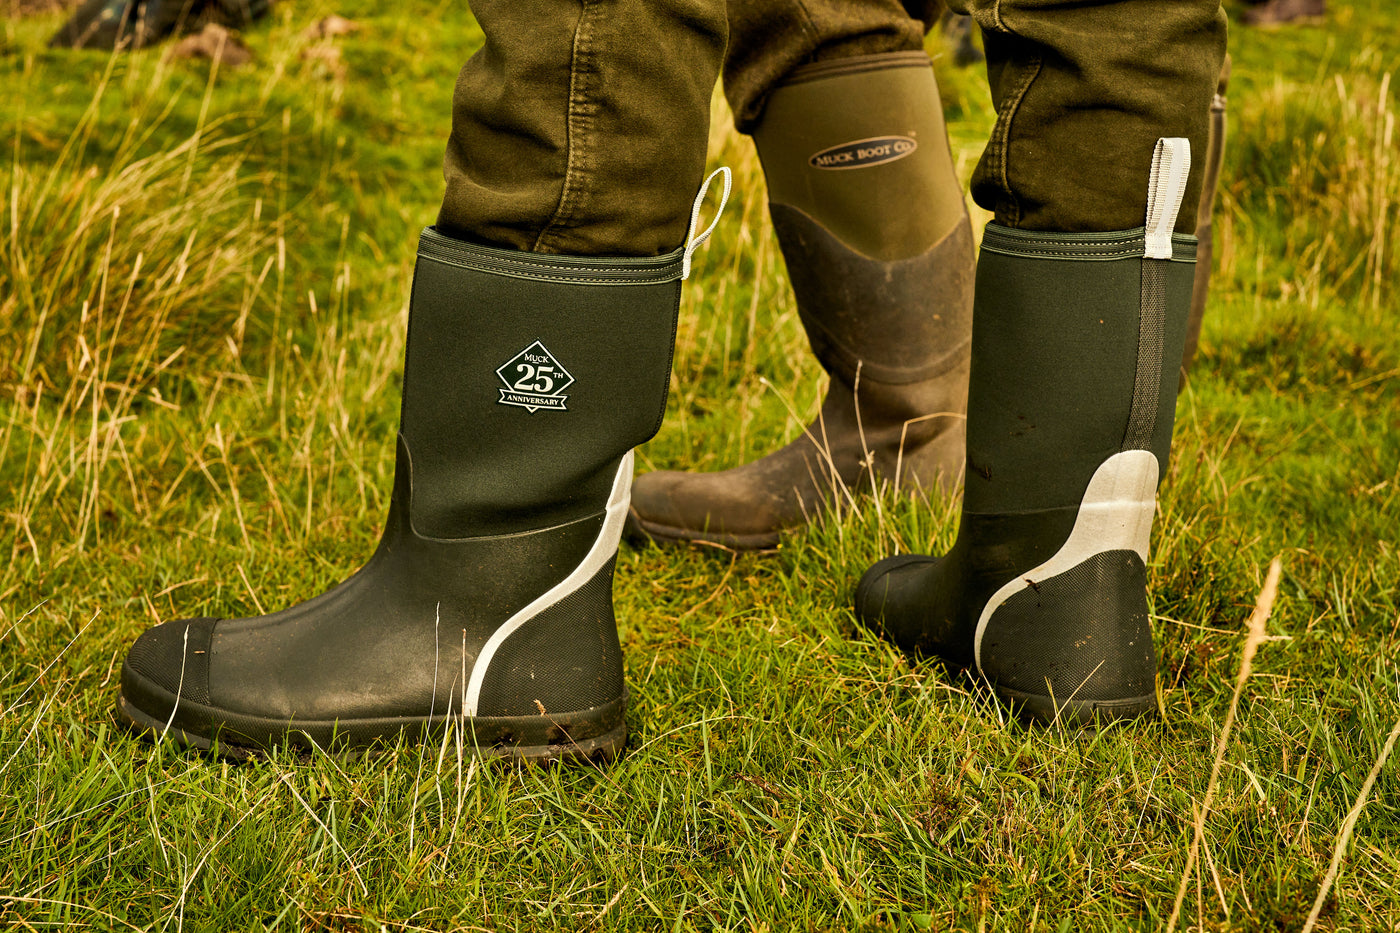 Close up image of a person wearing a pair of 25th anniversary Muck Boots wellingtons